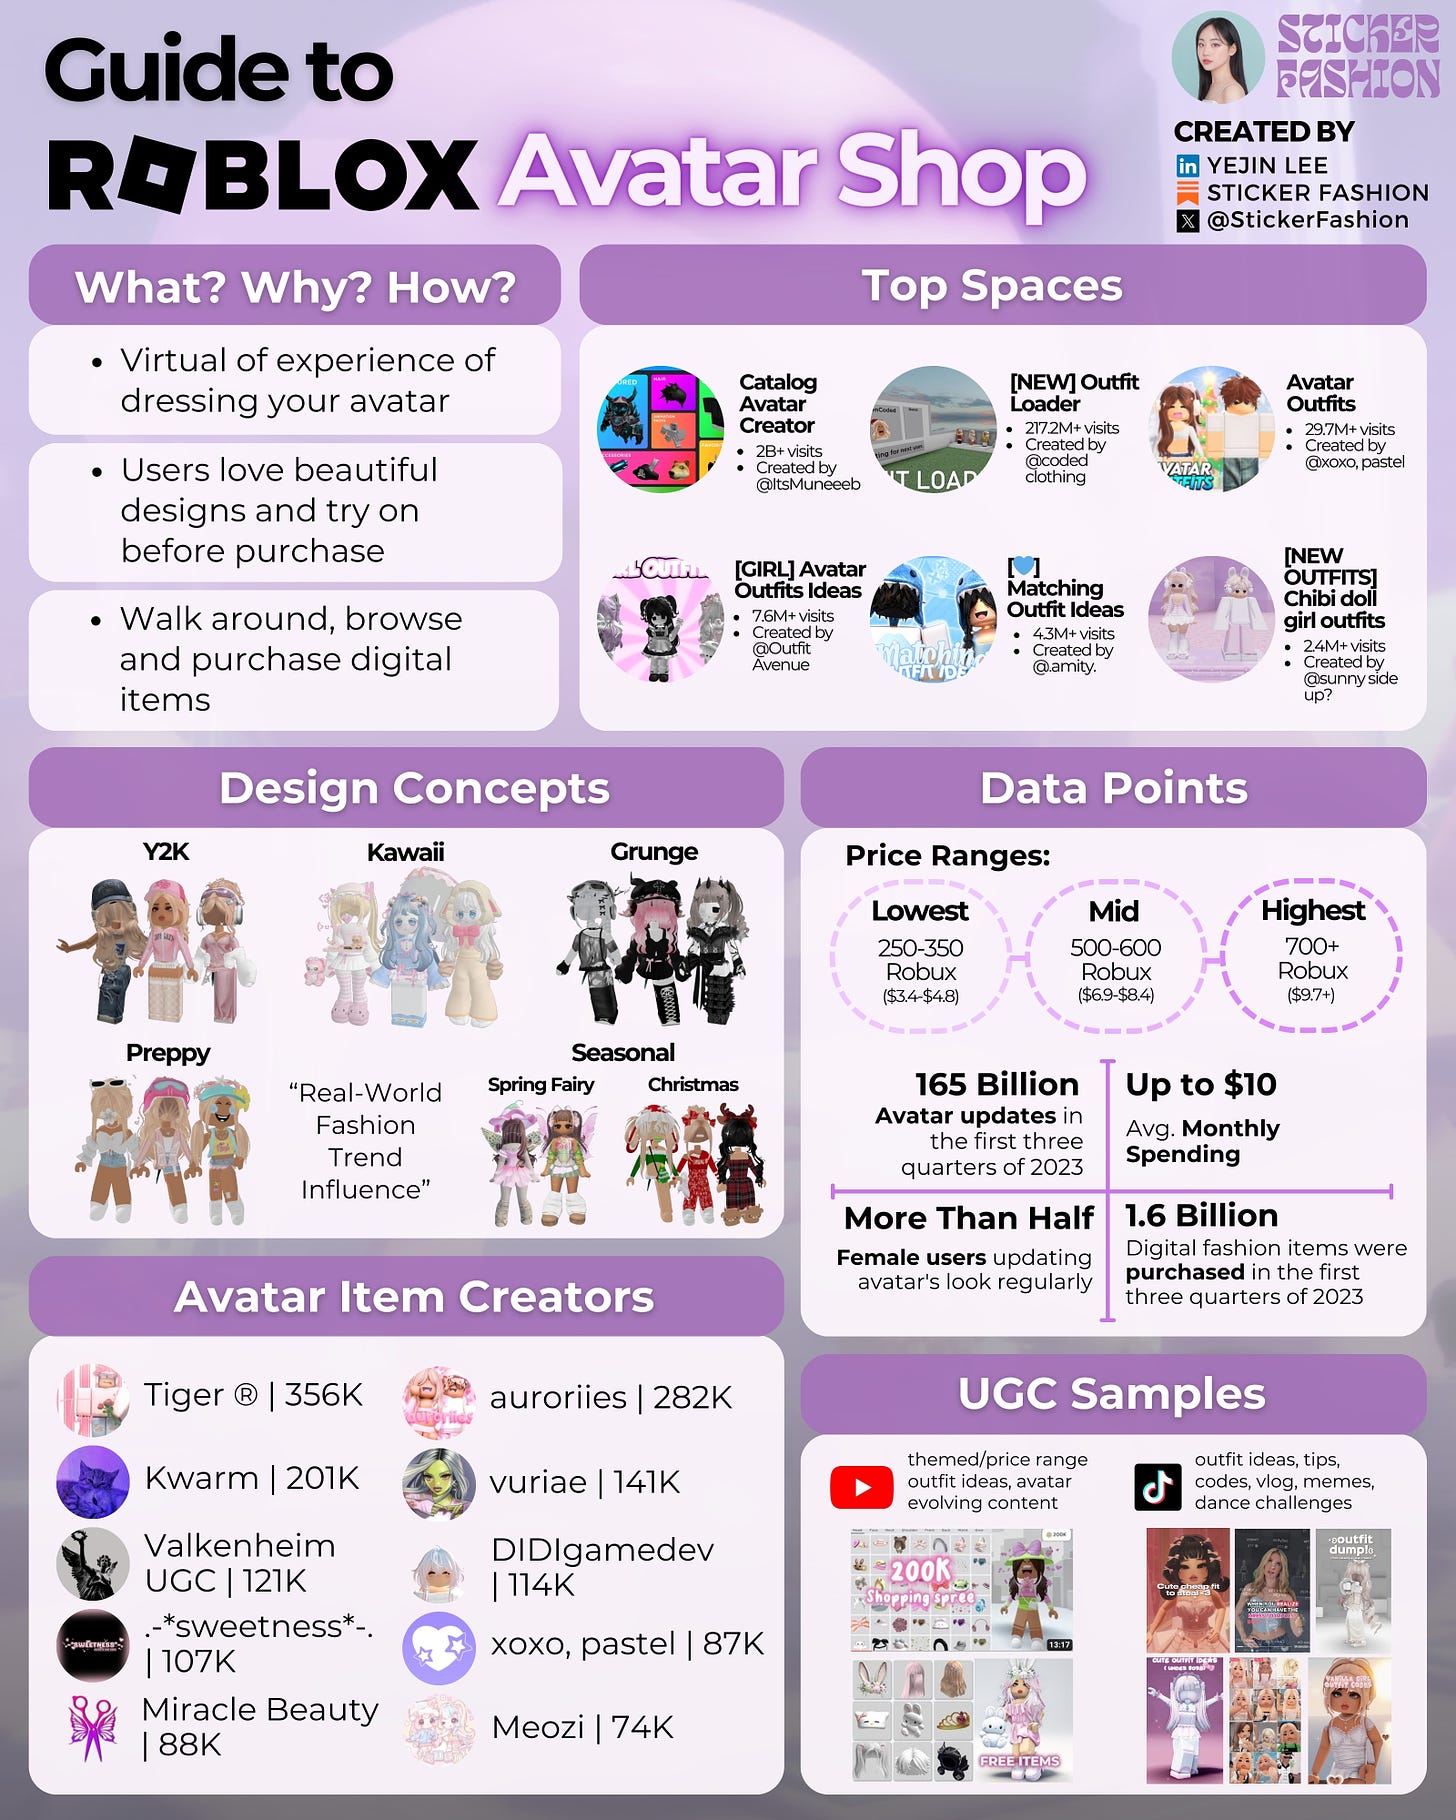 How to Slay with Roblox Avatar Shops